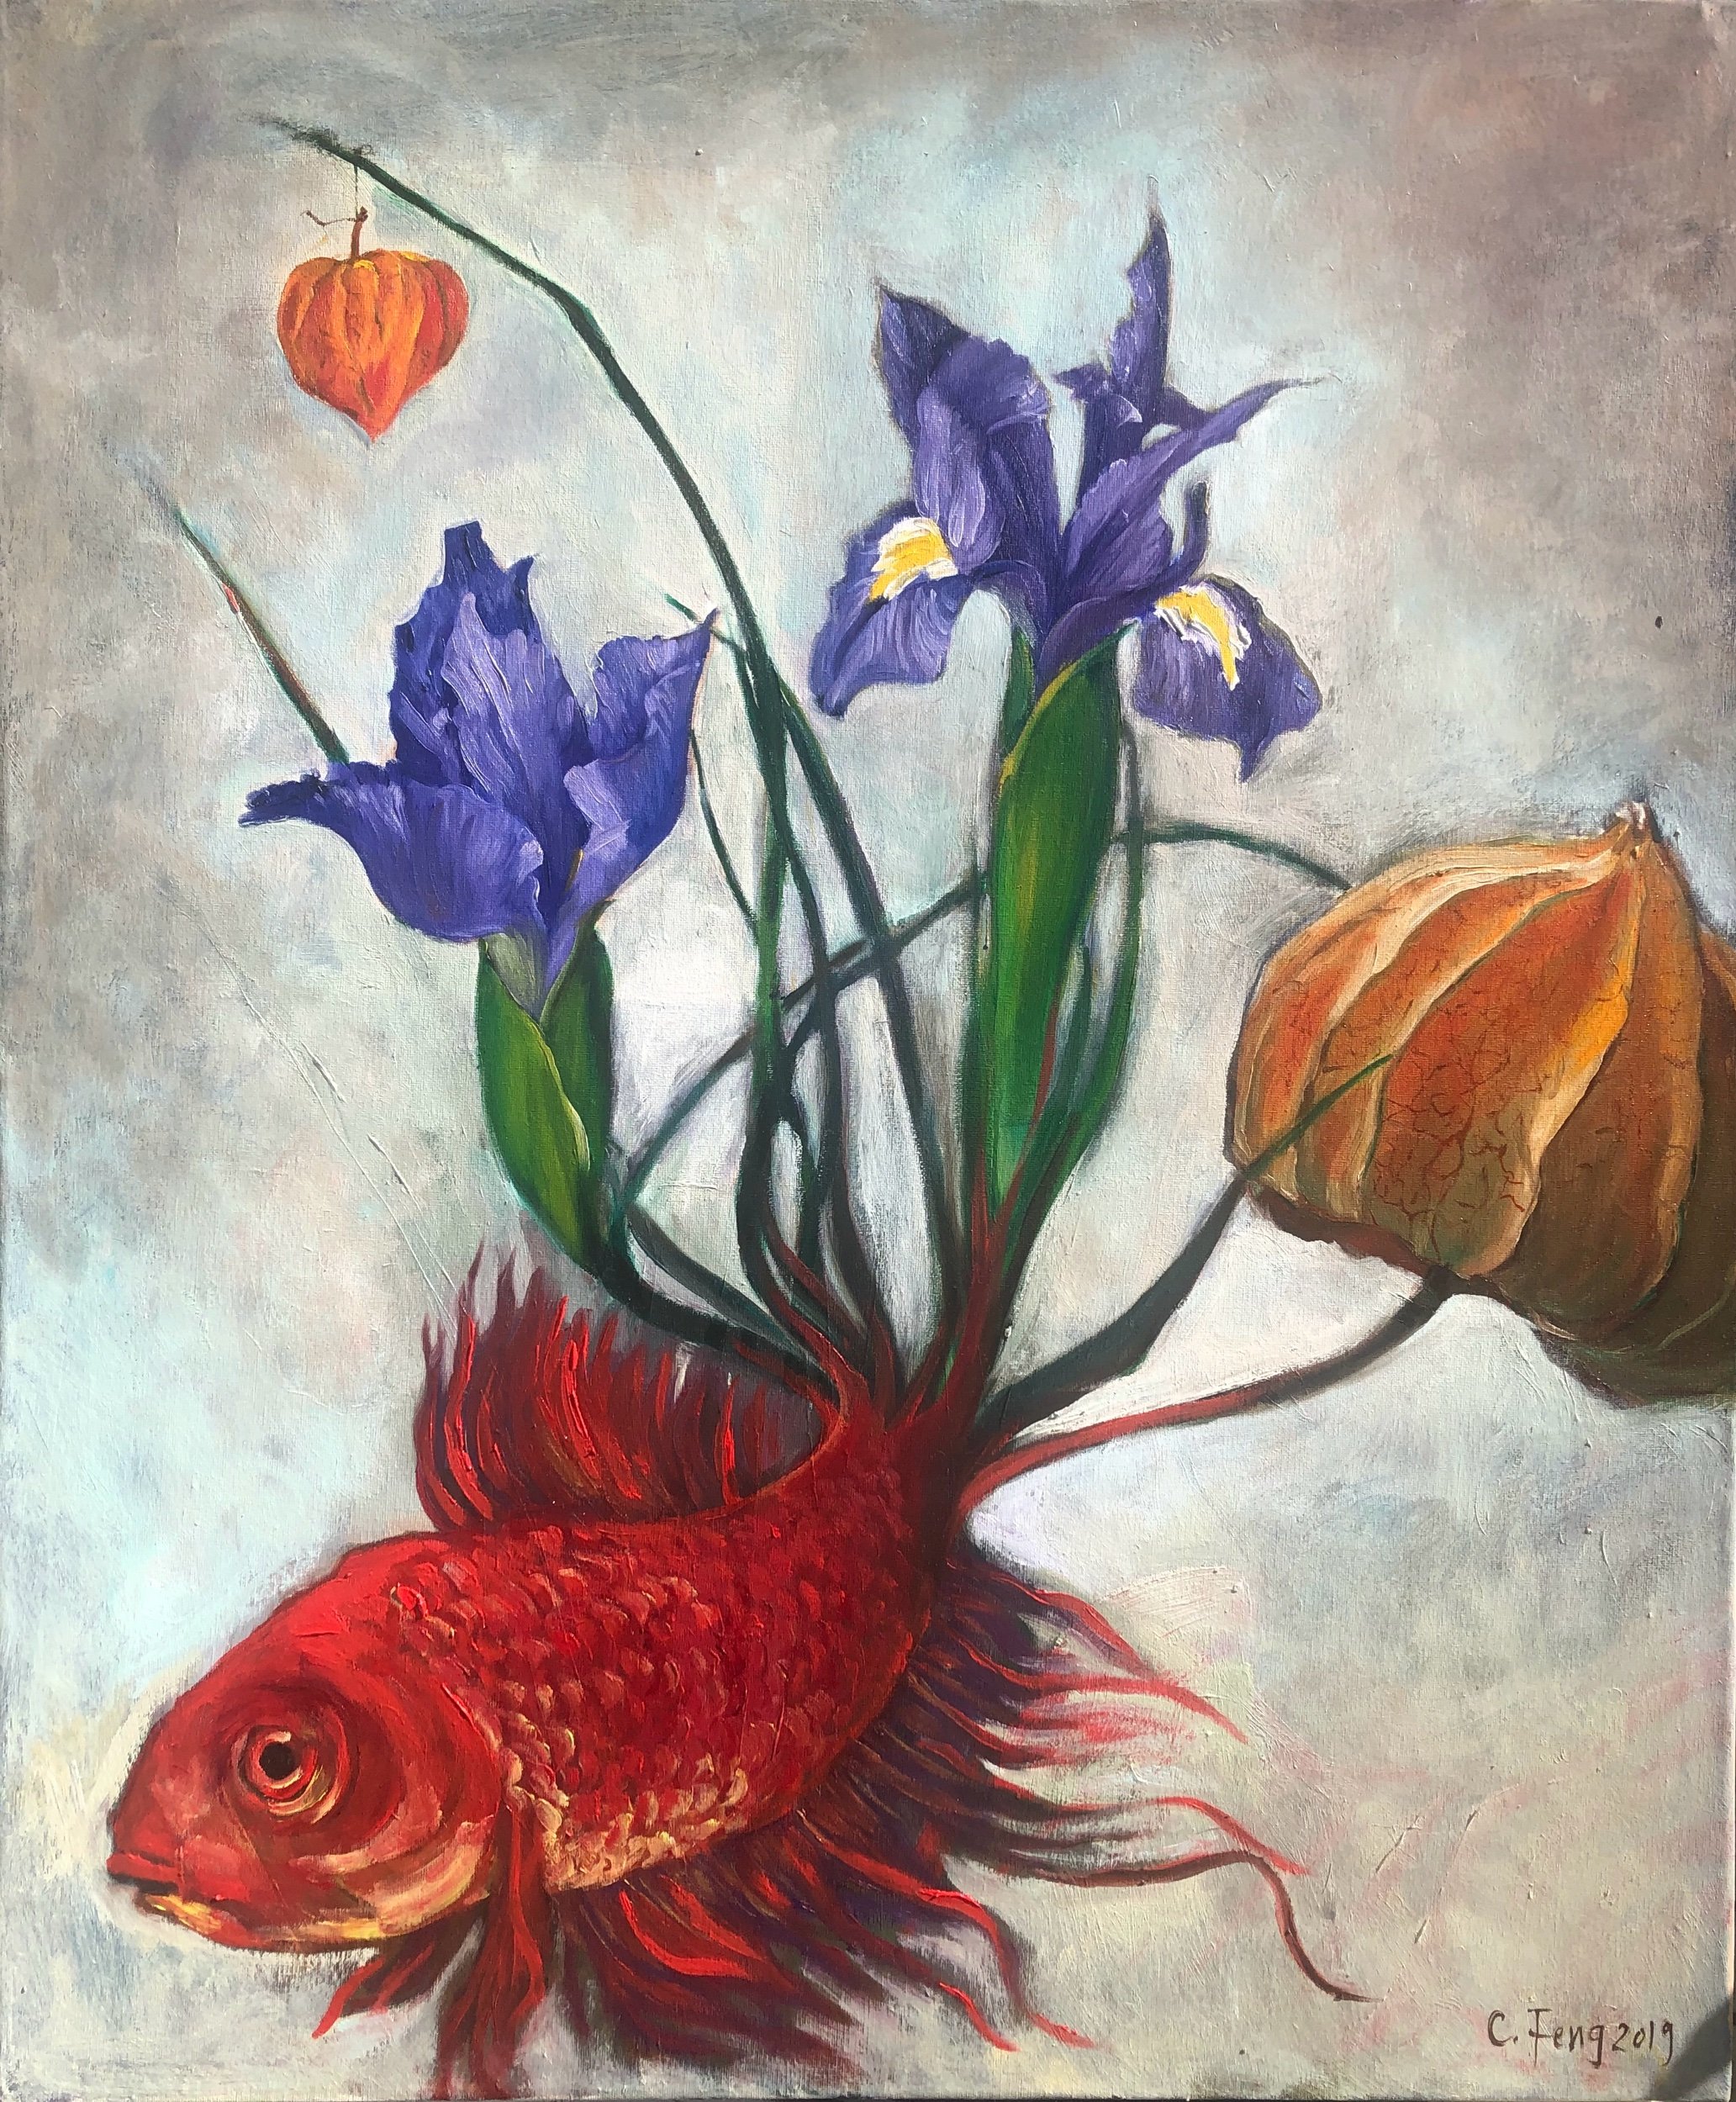 Red Fish/60x50cm /oil on canvas/2019